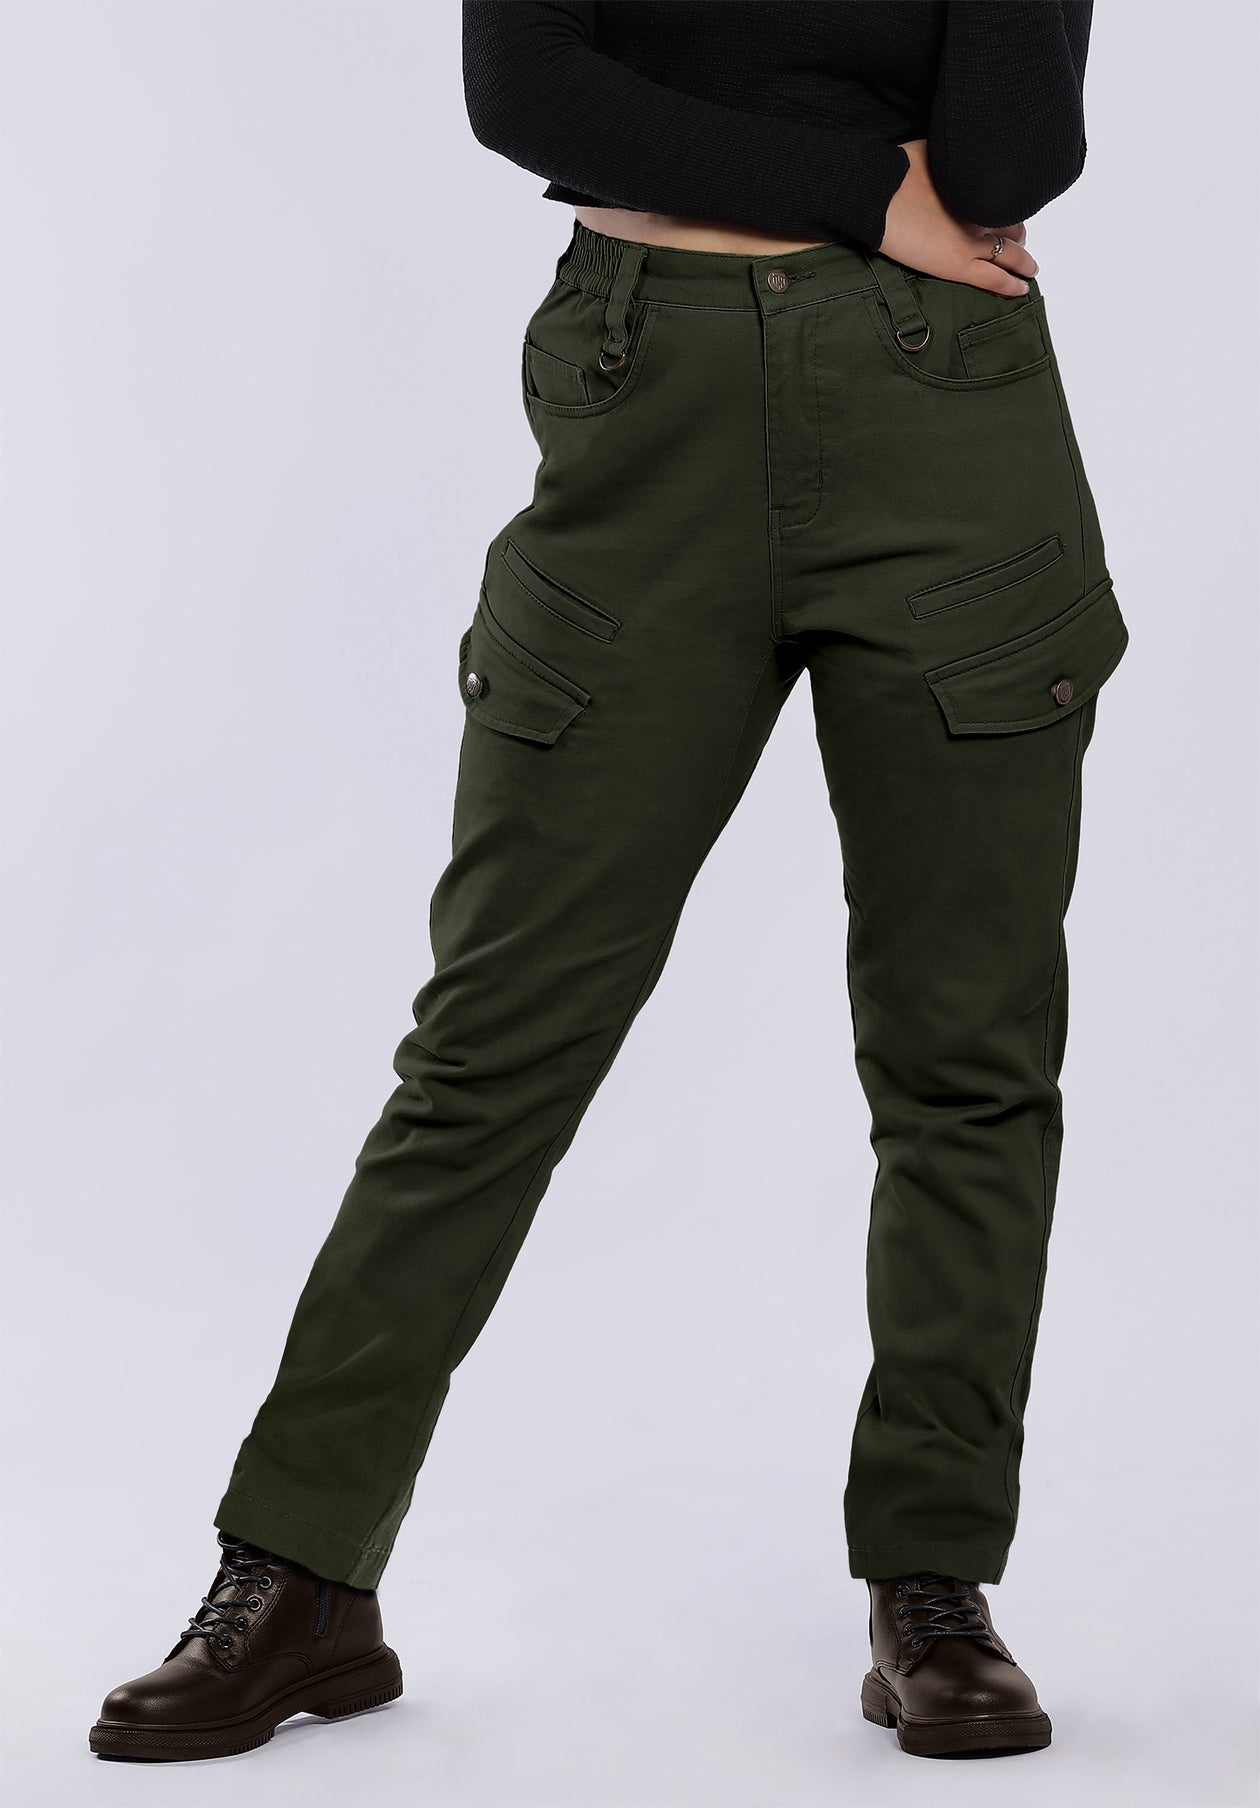 Tactical and Cargo pants for Women in Nepal – Harrington Nepal